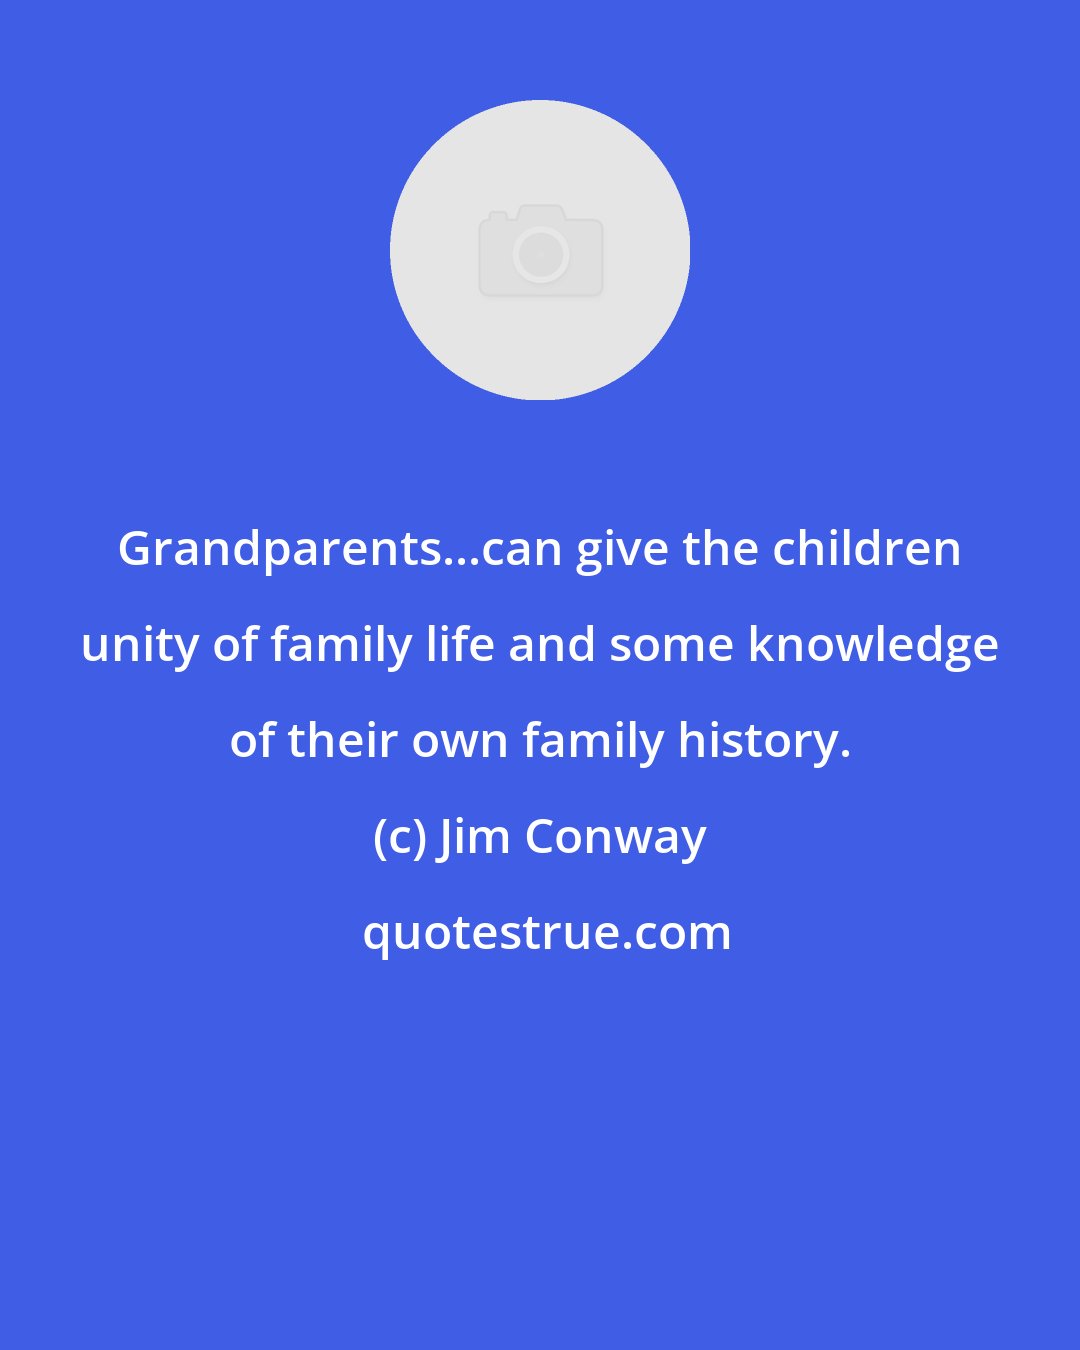 Jim Conway: Grandparents...can give the children unity of family life and some knowledge of their own family history.